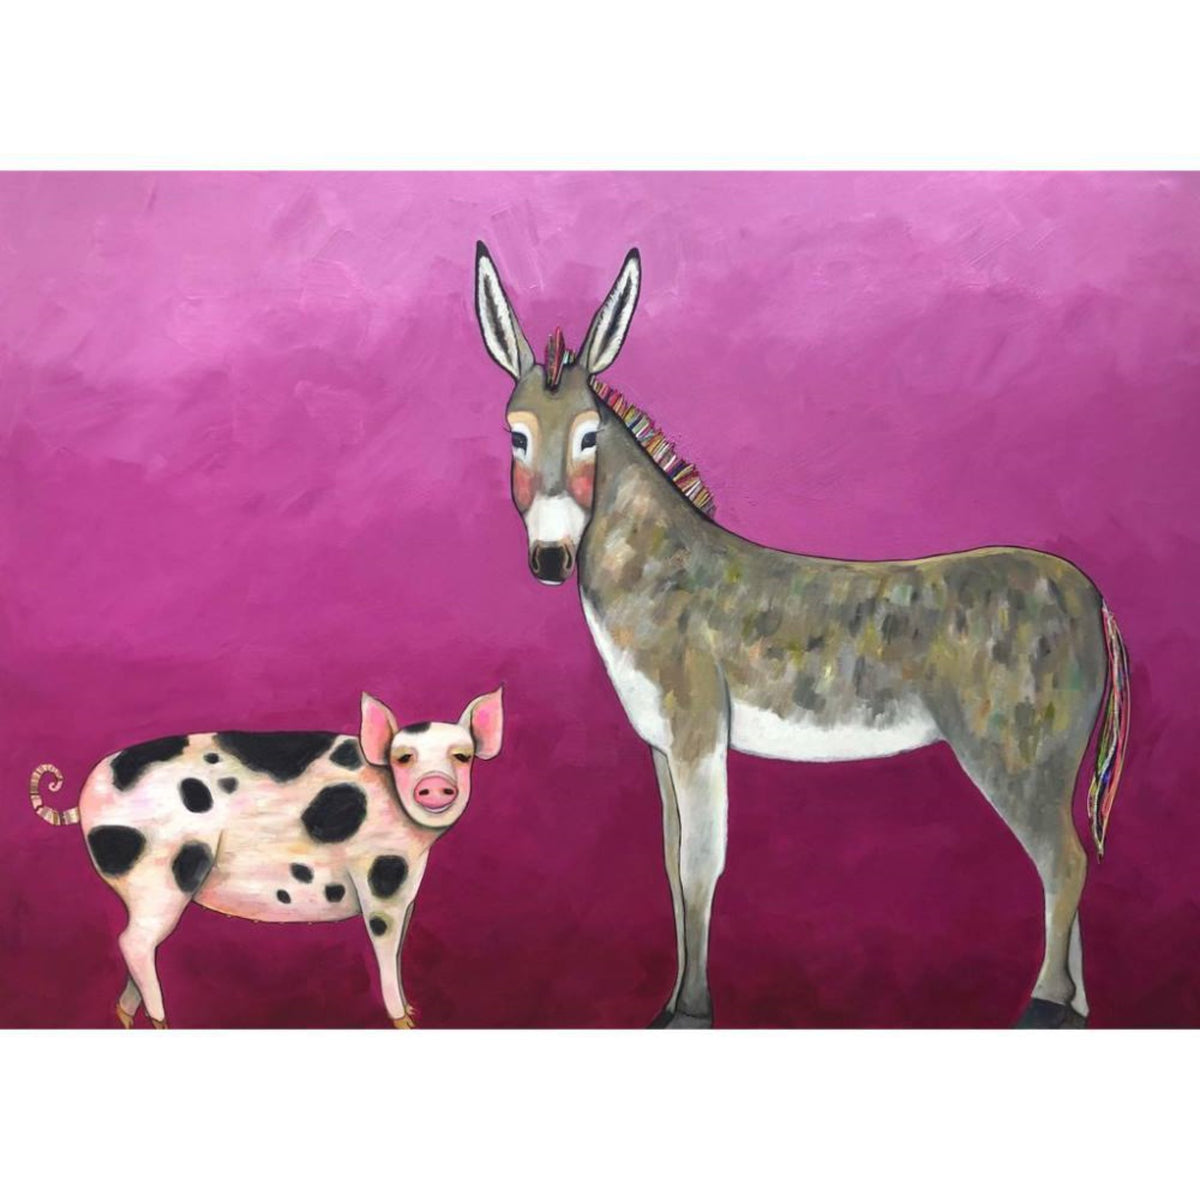 "Donkey and Pig Tails" 84inx60in Original Oil Painting By Eli Halpin